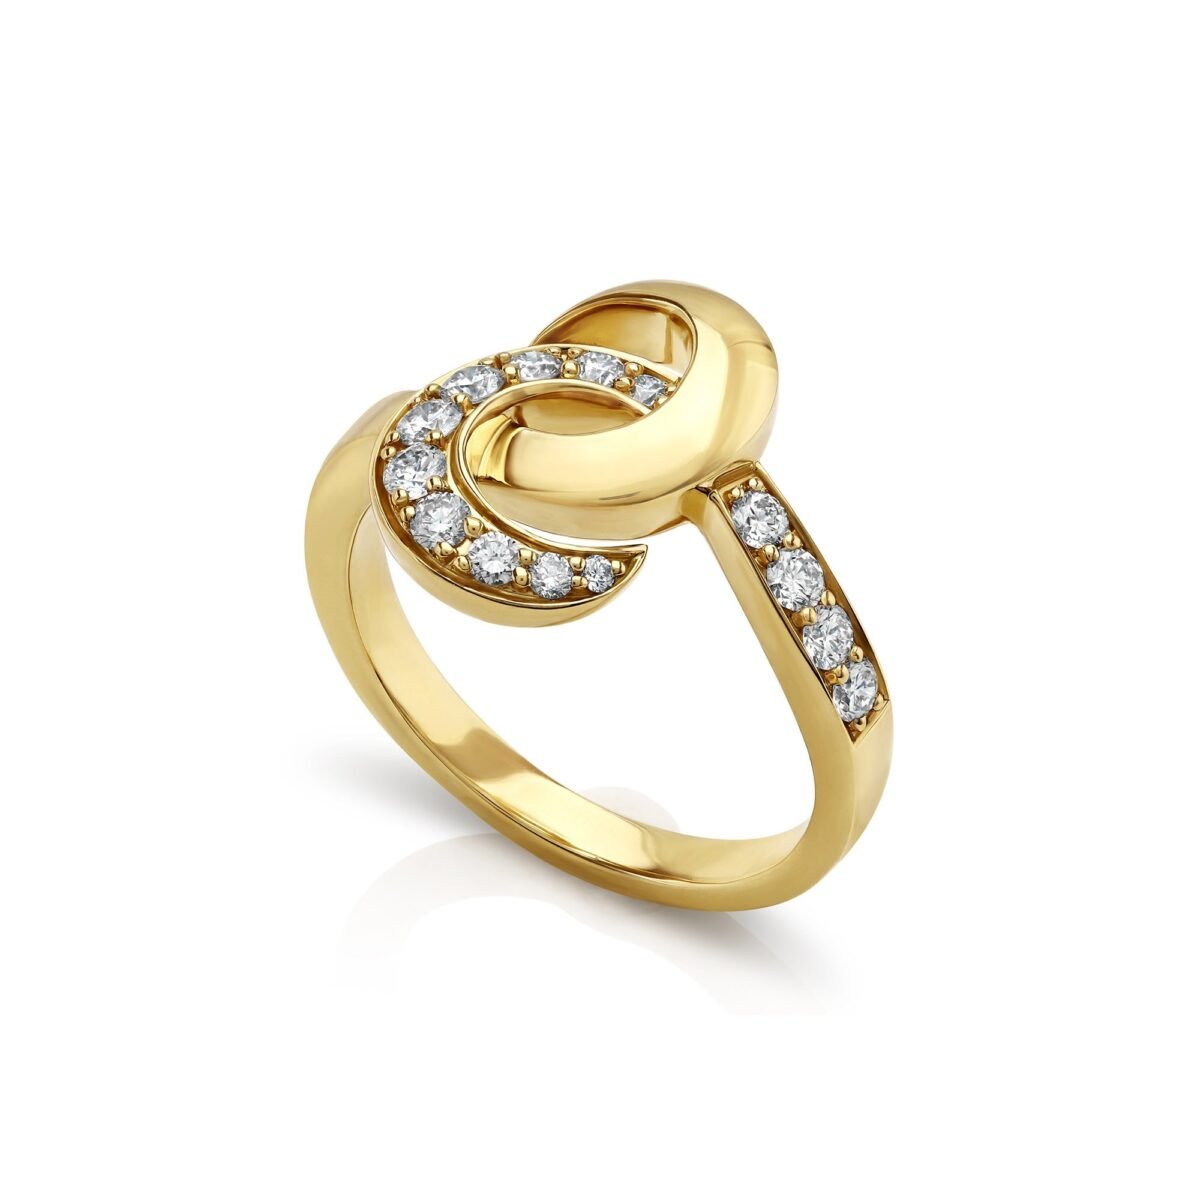 Hooked On You Yellow Gold Diamond Ring